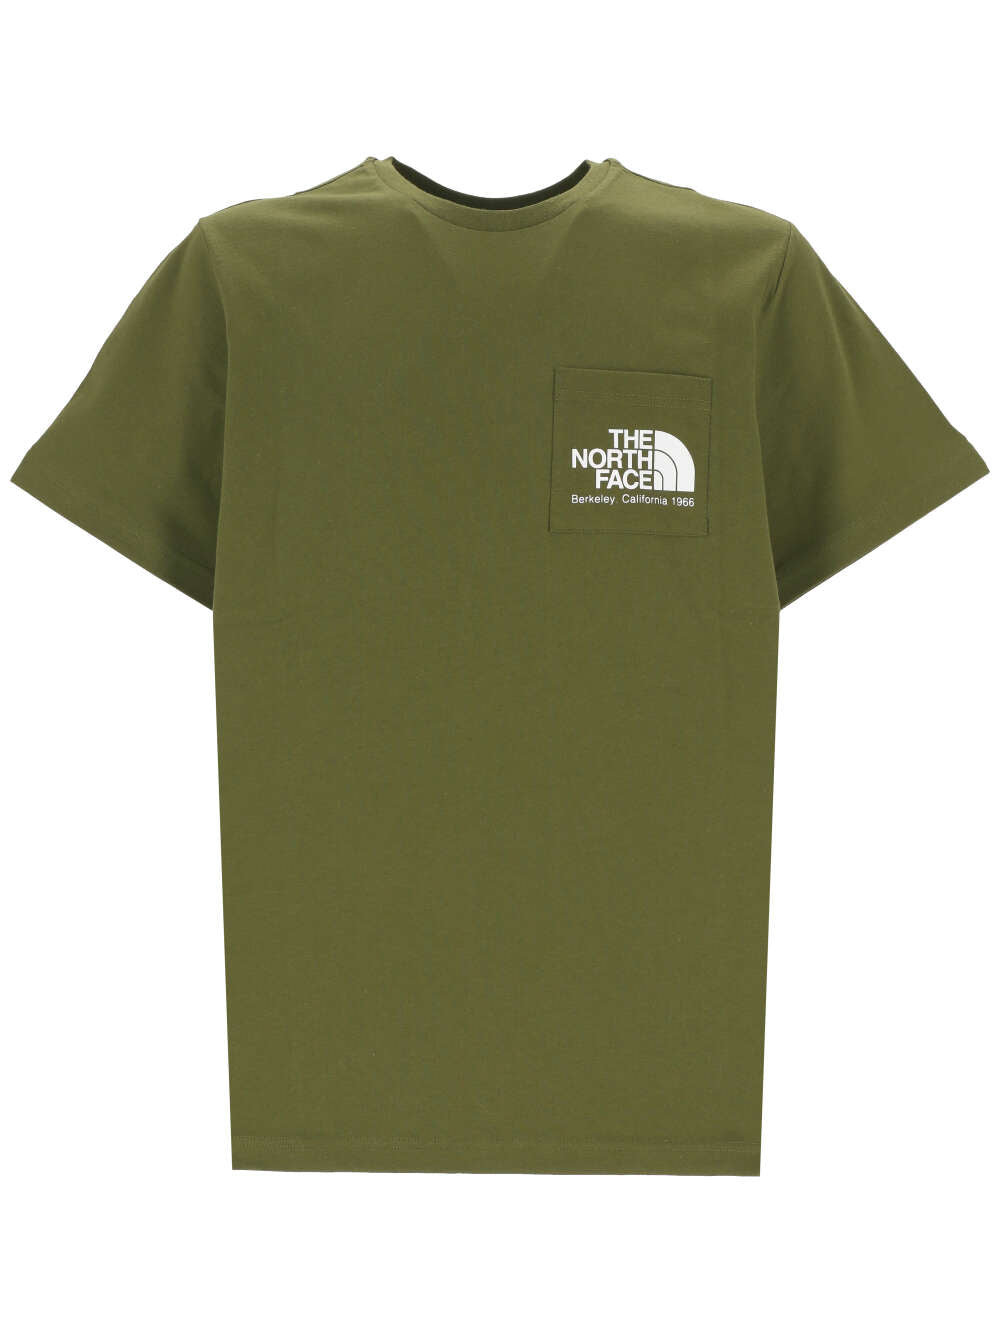 THE NORTH FACE NF0A87U2 Man FOREST OLIVE T-shirts and Polos - Zuklat